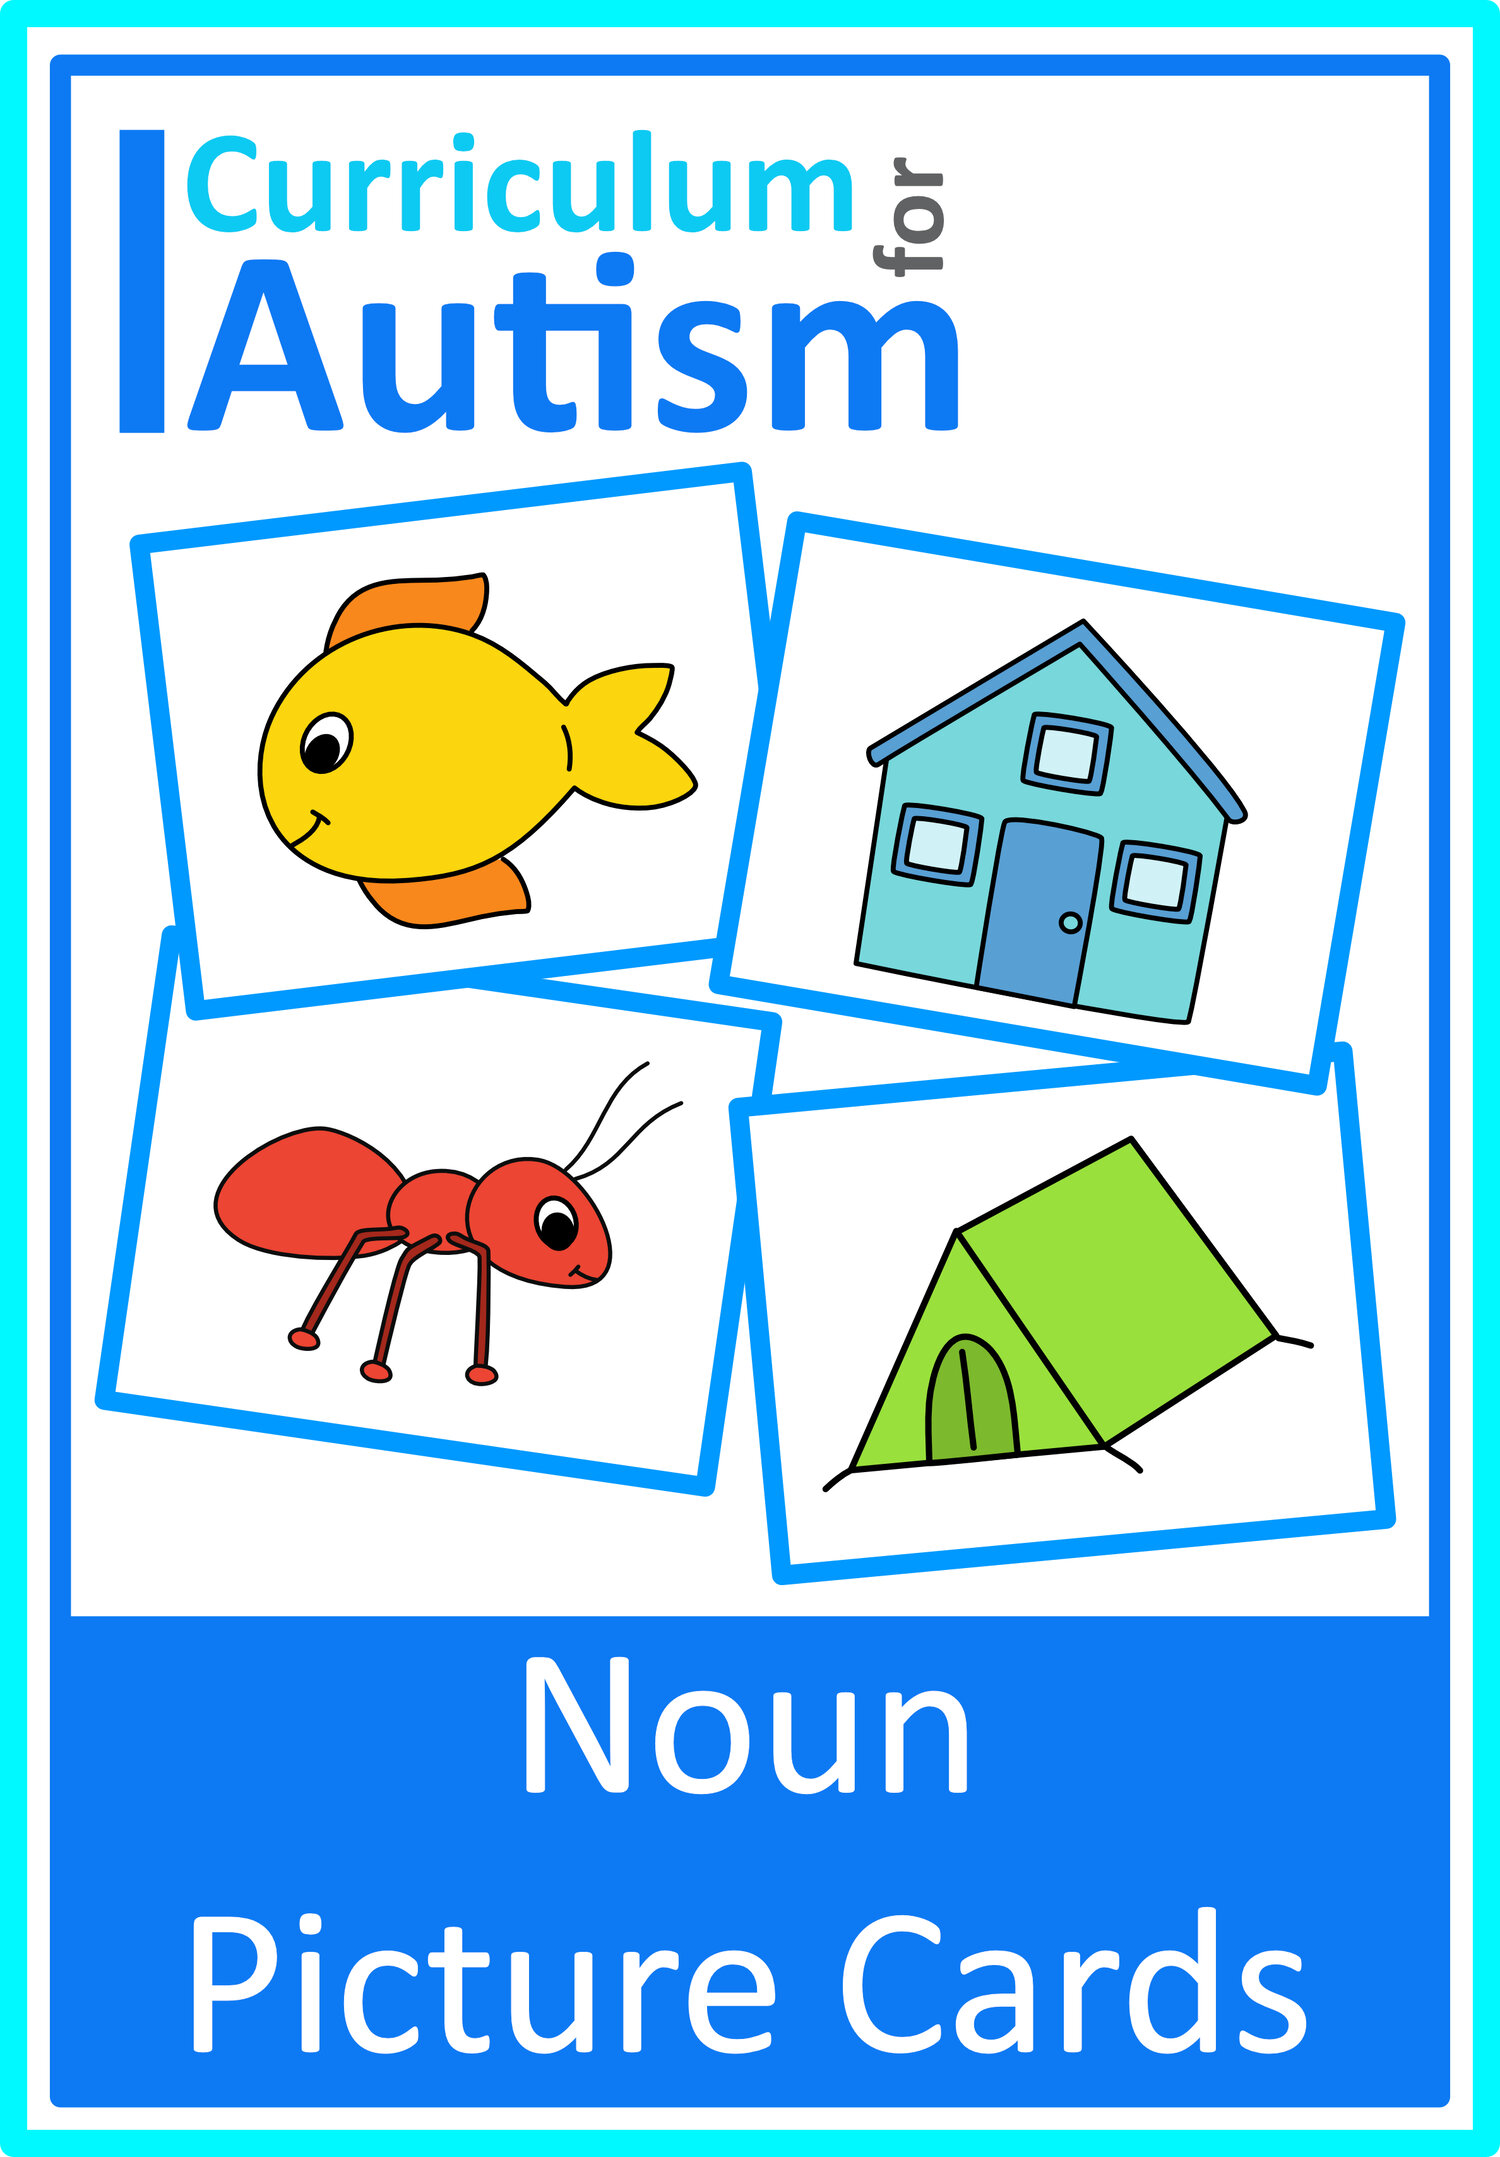 CLOTHING ID Flashcards: labels program for ABA /speech/ vocabulary - 33  cards